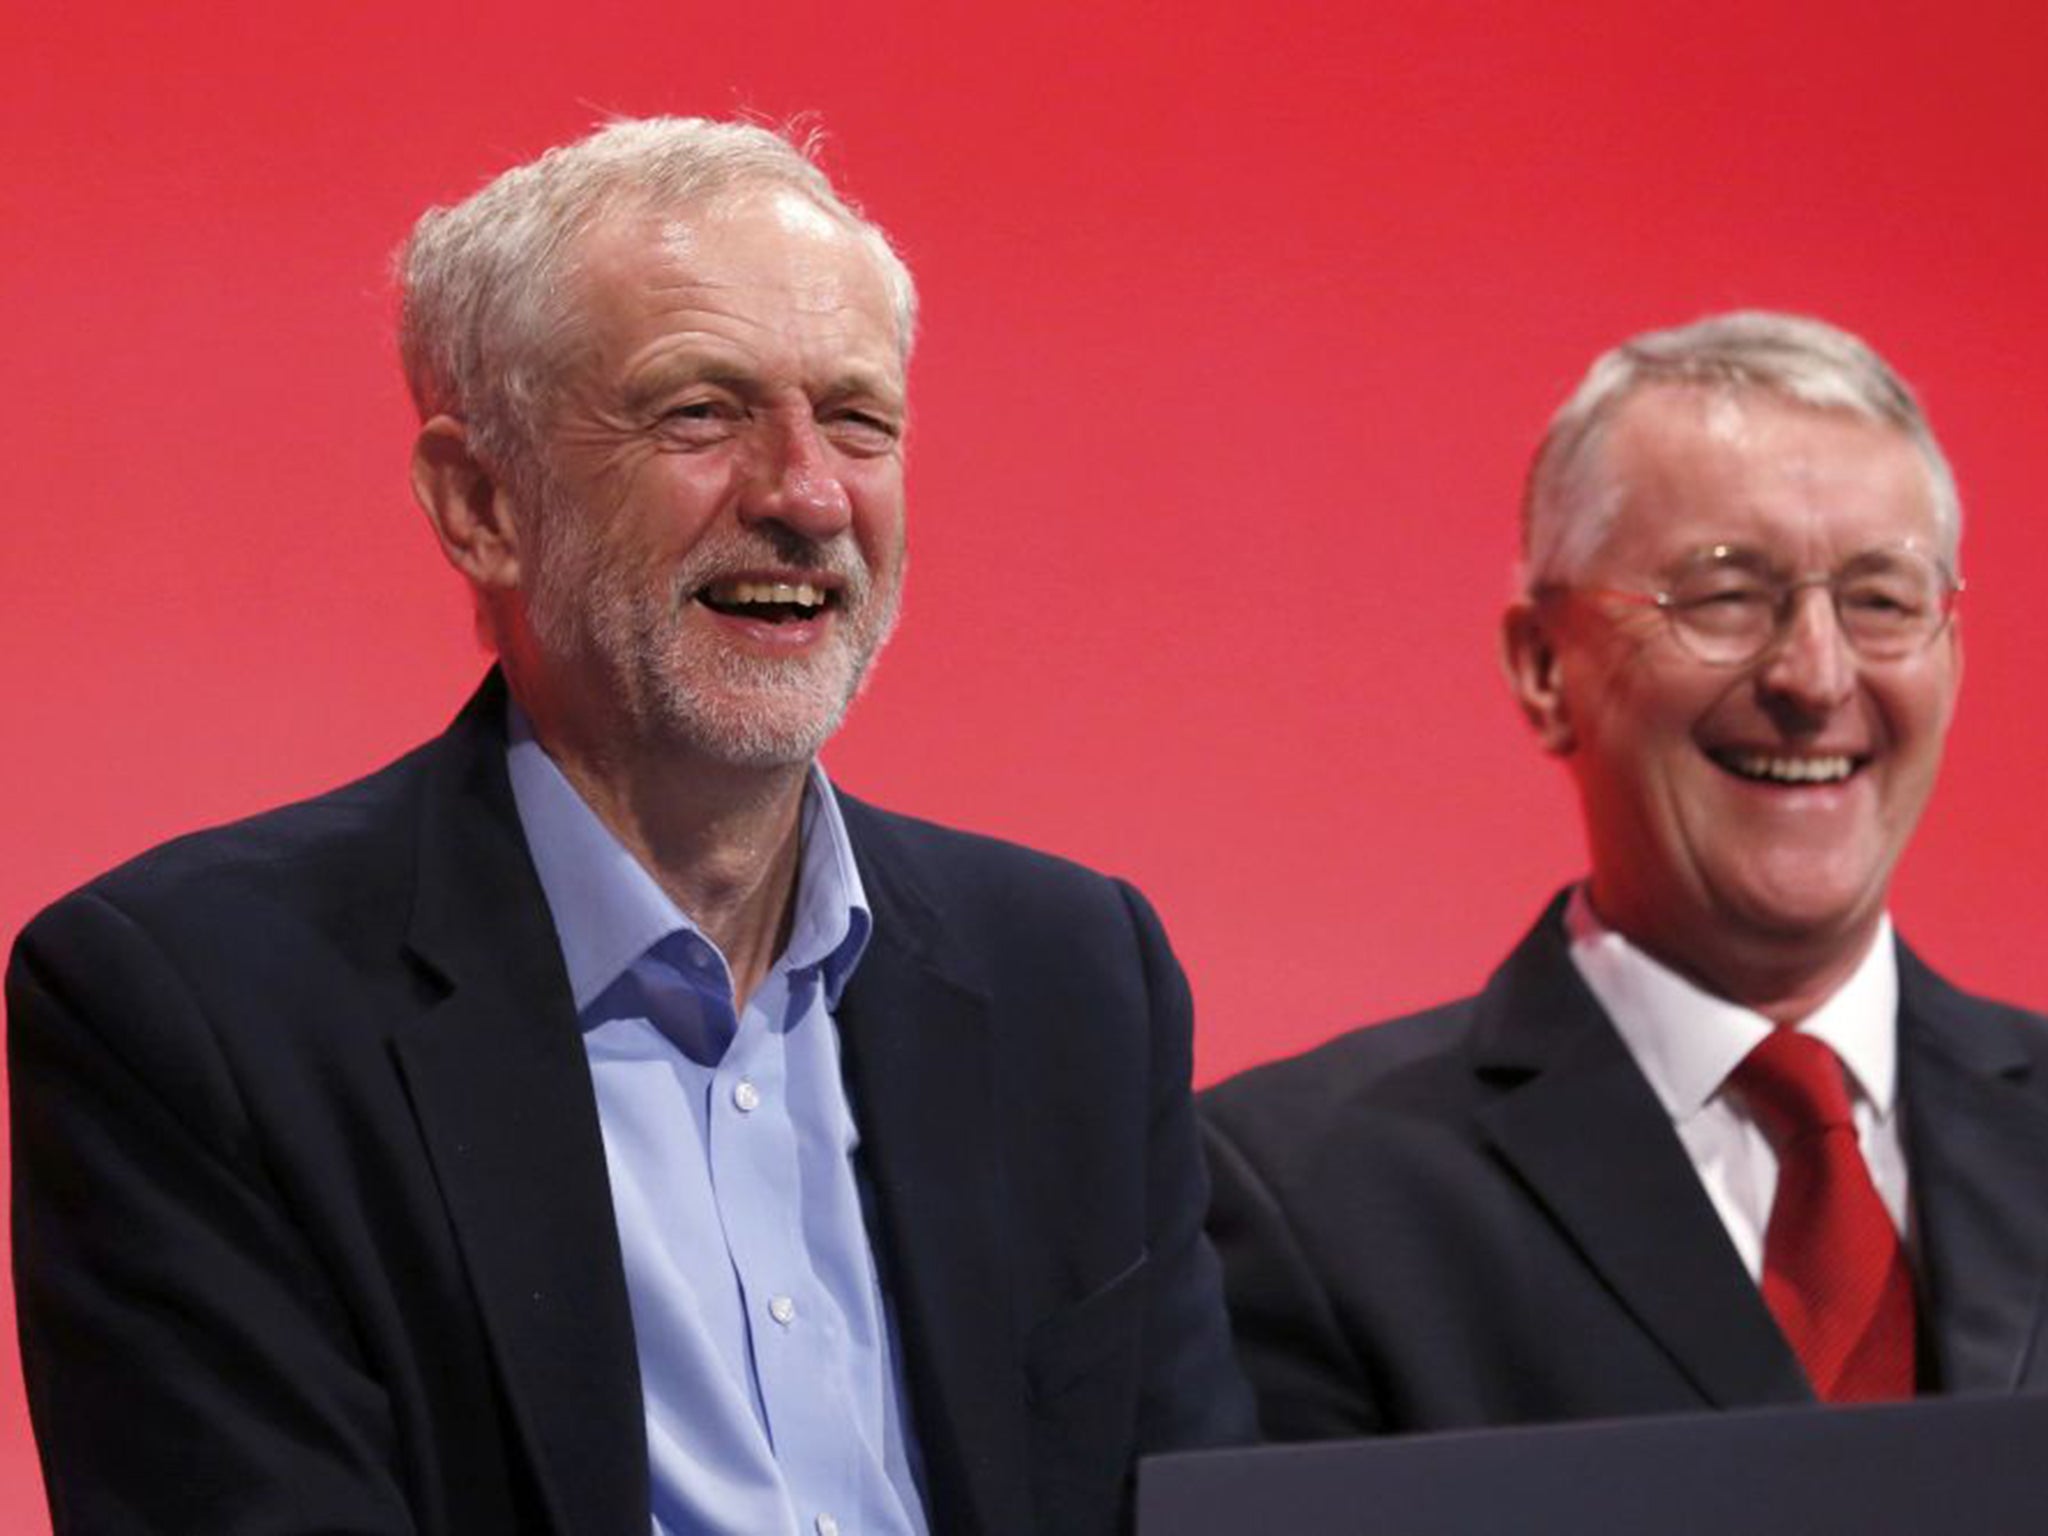 Hilary Benn twice refused to answer whether he would resign if Jeremy Corbyn attended Stop the War Coalition event